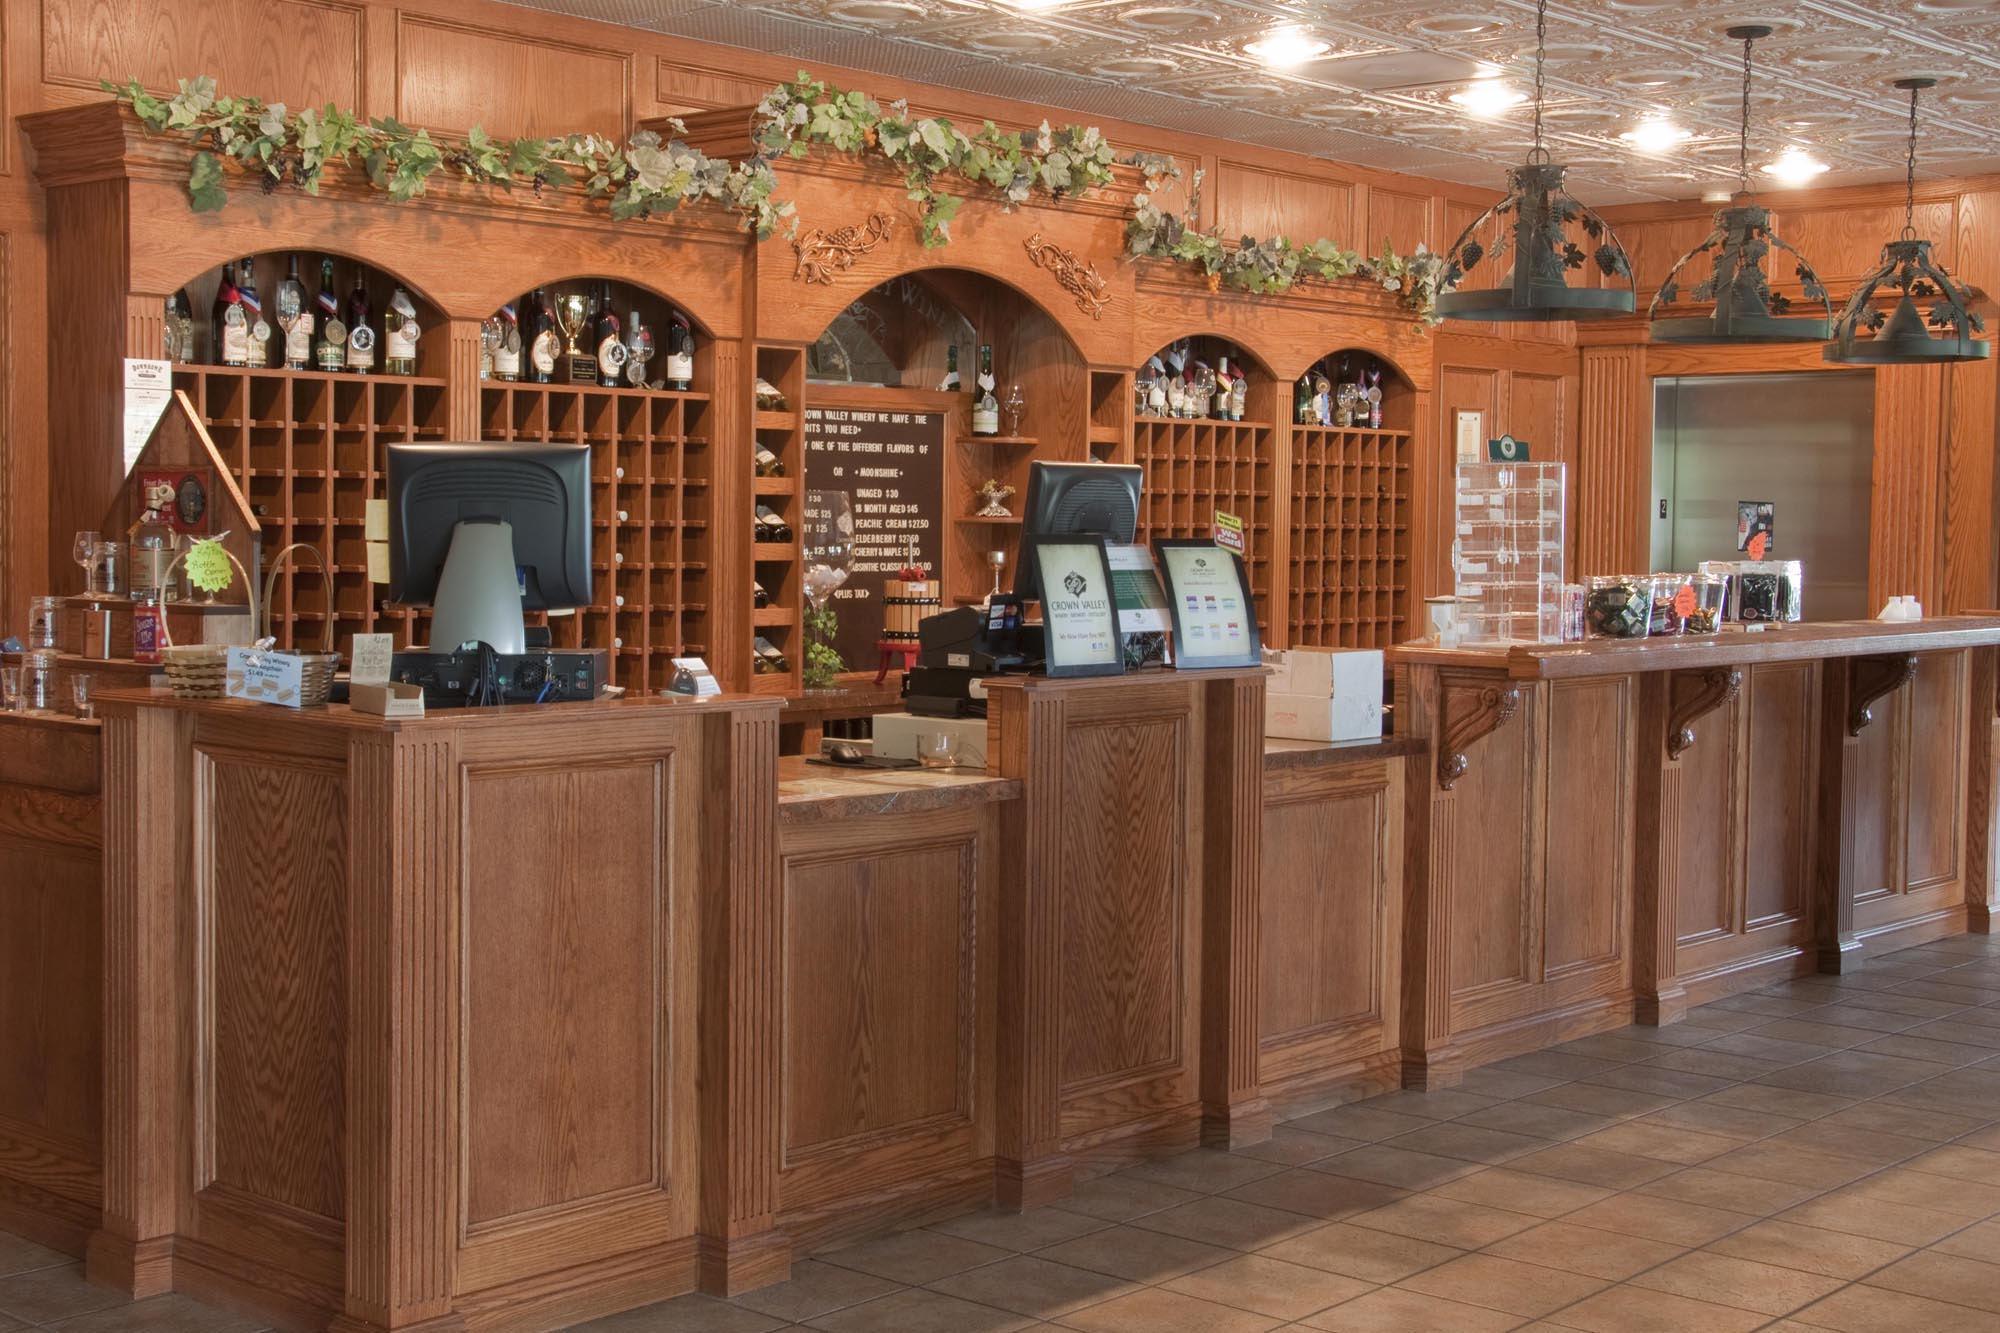 Crown Valley Winery- Front desk of the winery. Two computers on a large wooden desk.